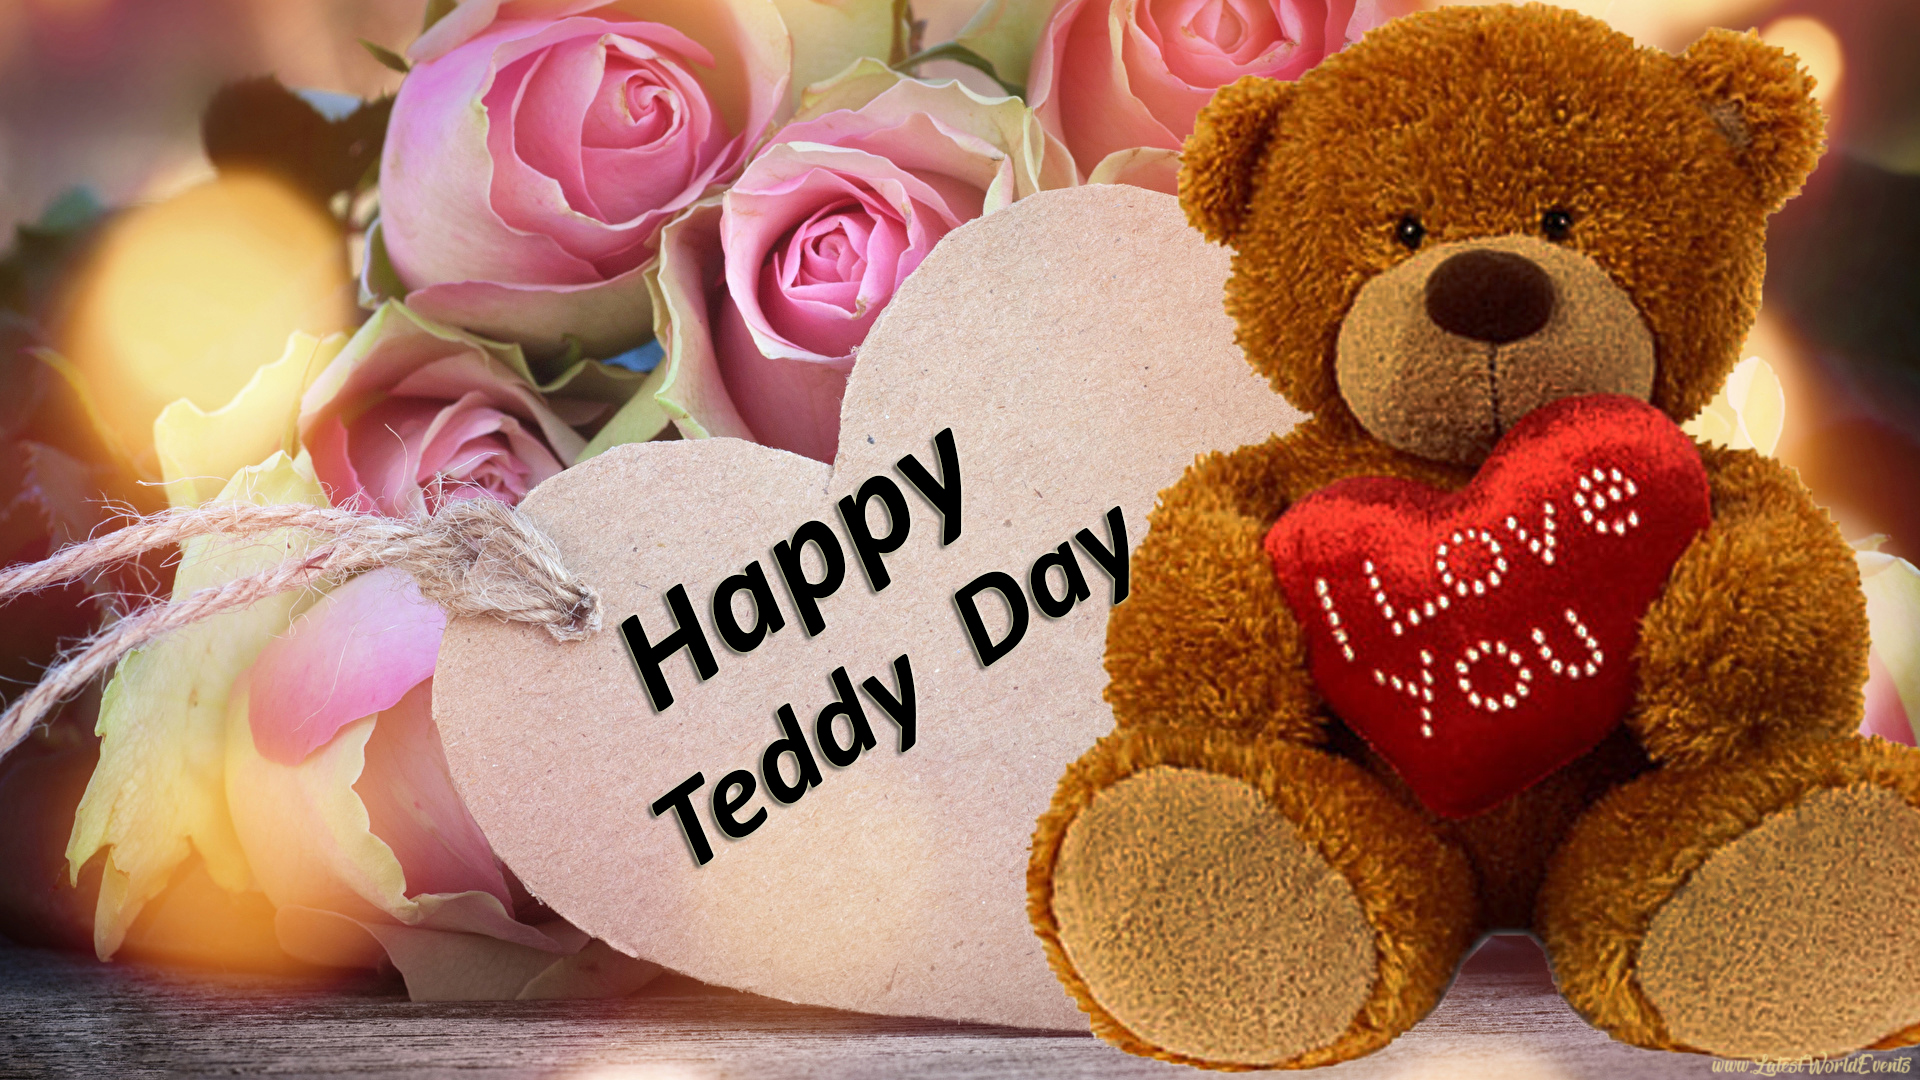 Download-happy-teddy-day-images